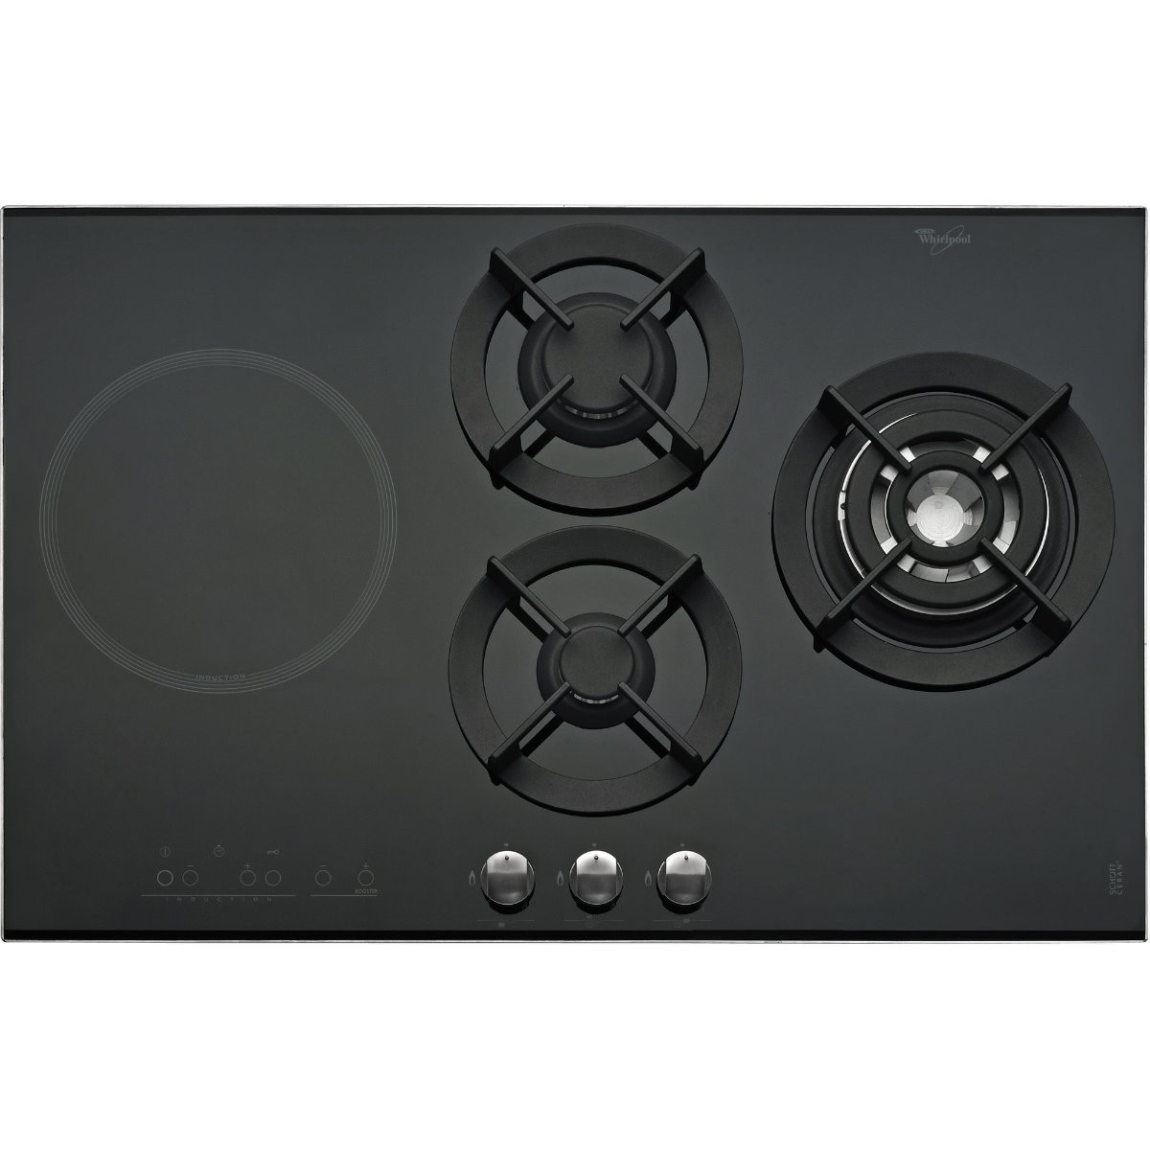 4 Burner Gas on Glass Induction and Gas Hob in Black AKT 477 IX Whirlpool Gas Hobs Gas Hobs & Gas Cooker  Choose Sample / Pattern Chart